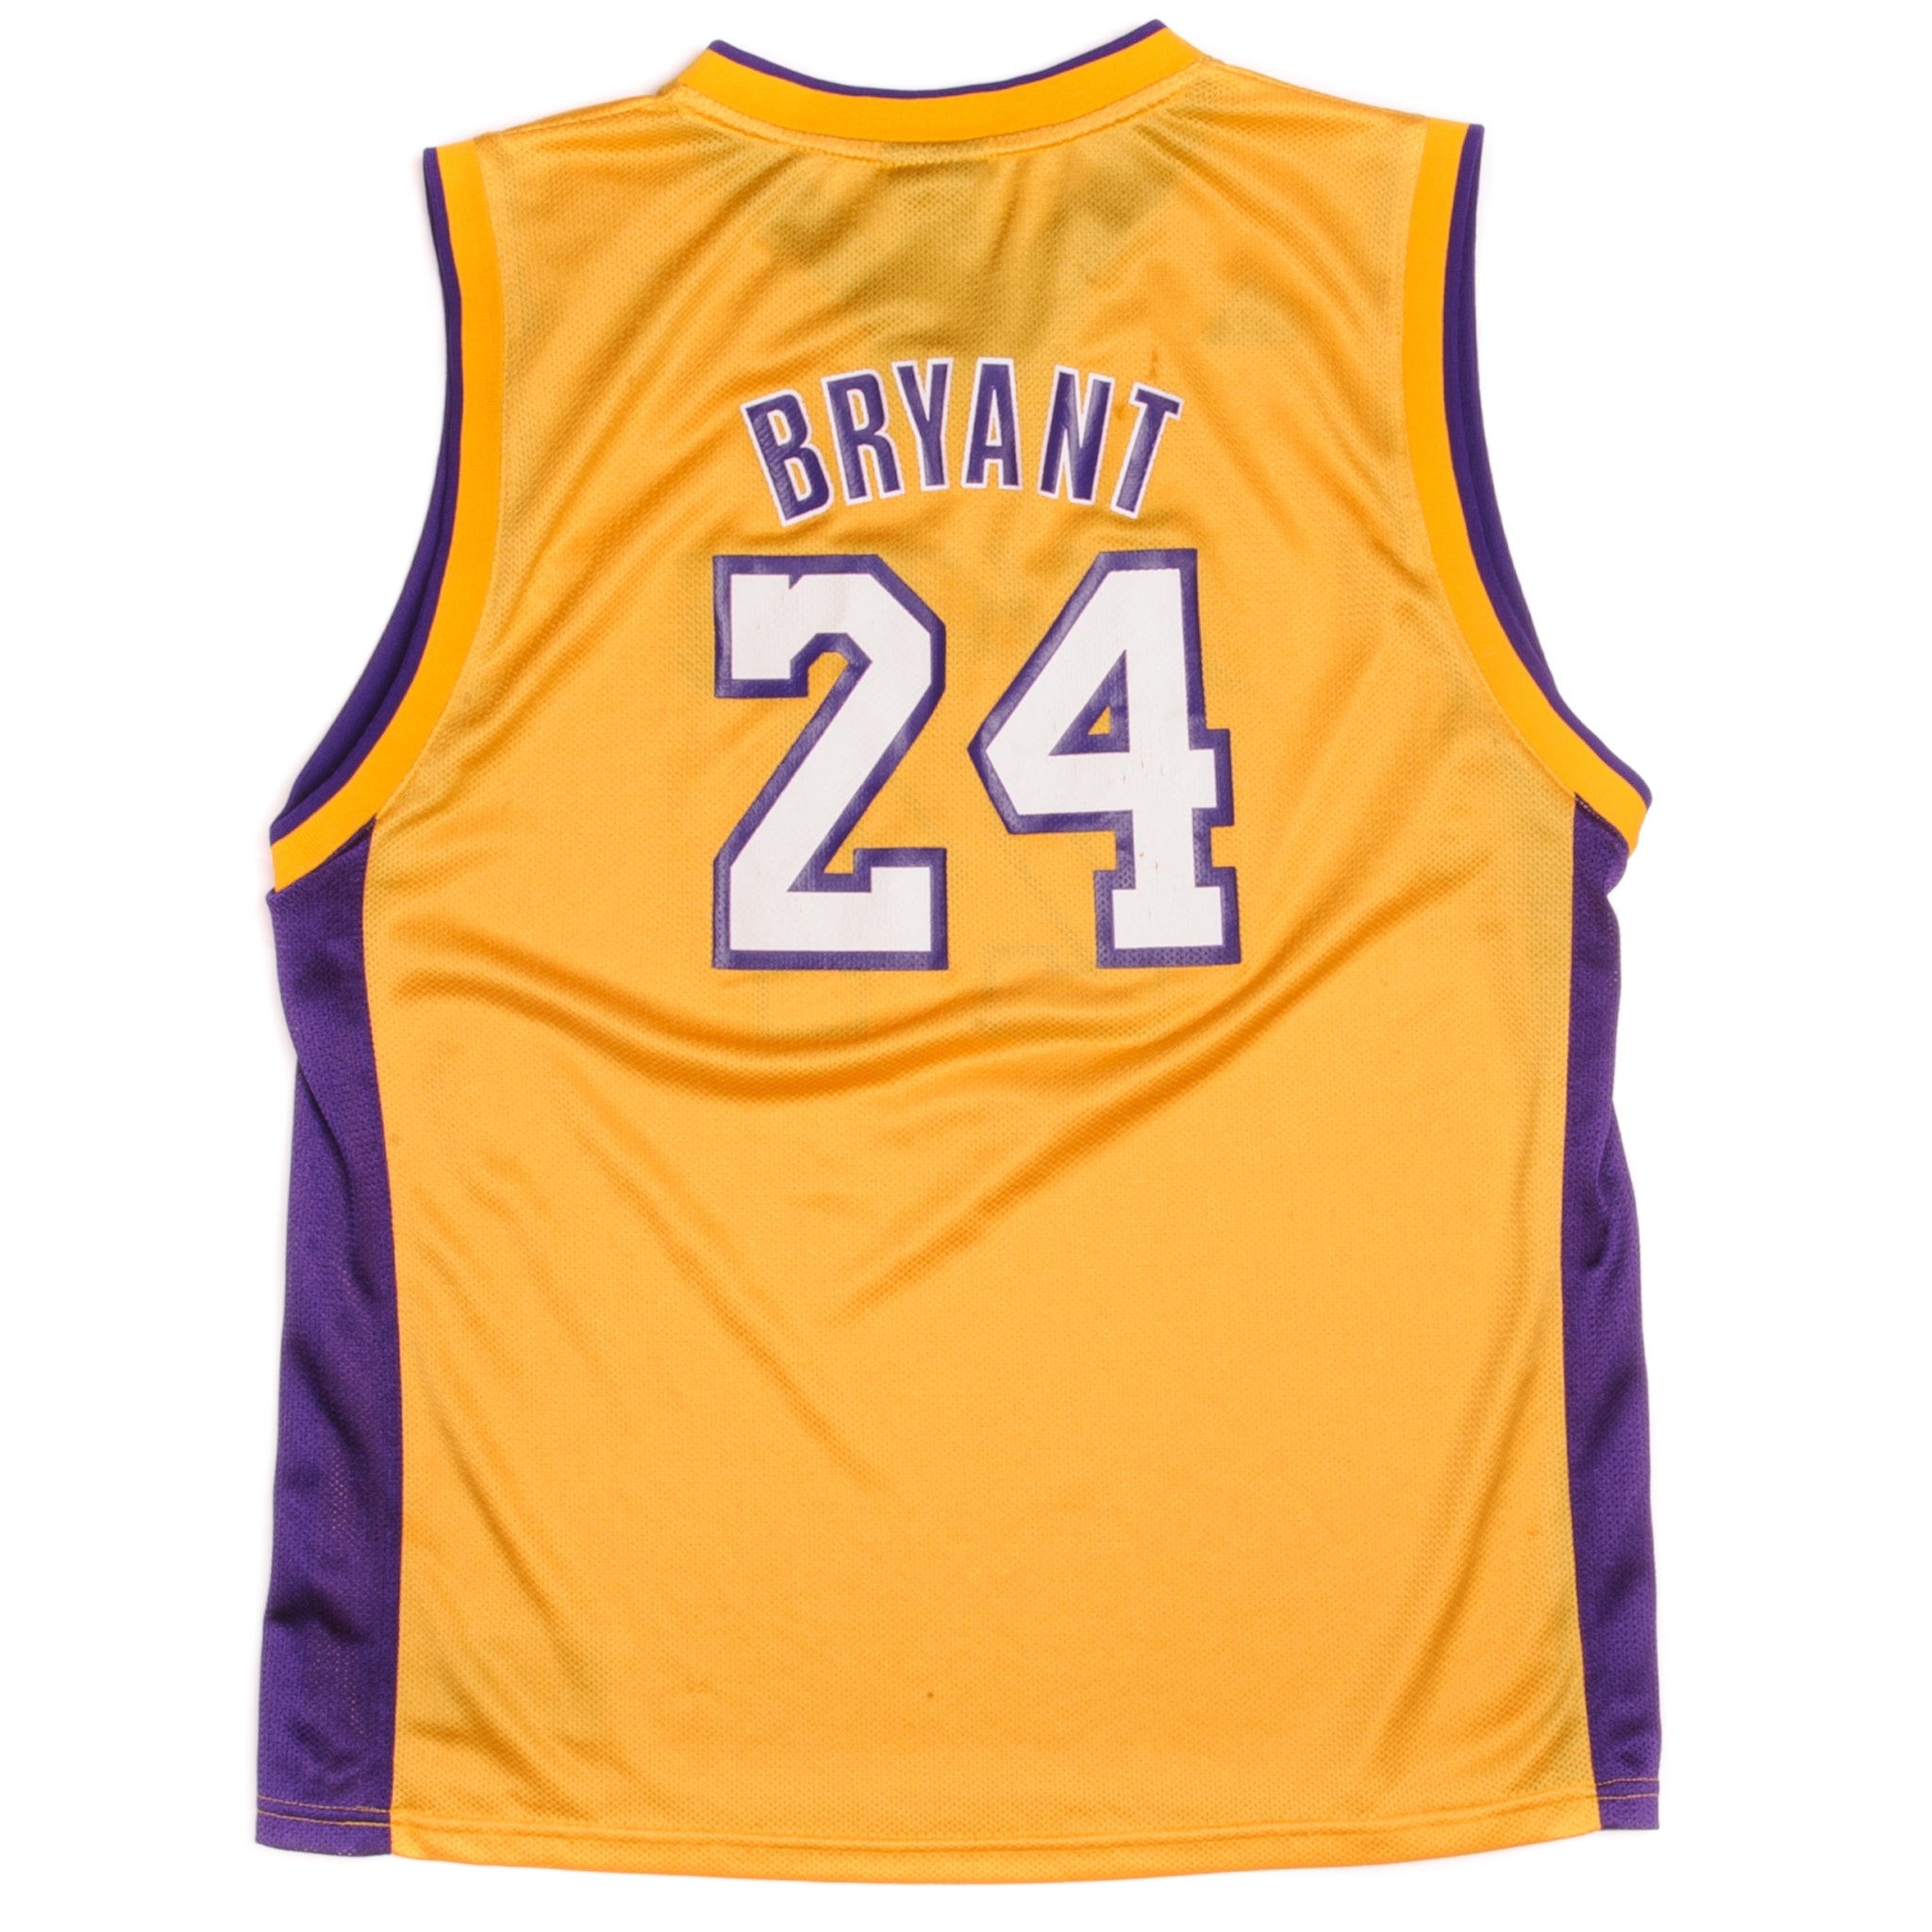 Kobe Bryant Adidas NBA Authentic Jersey Size 56 Brand New Thick for Framing  24